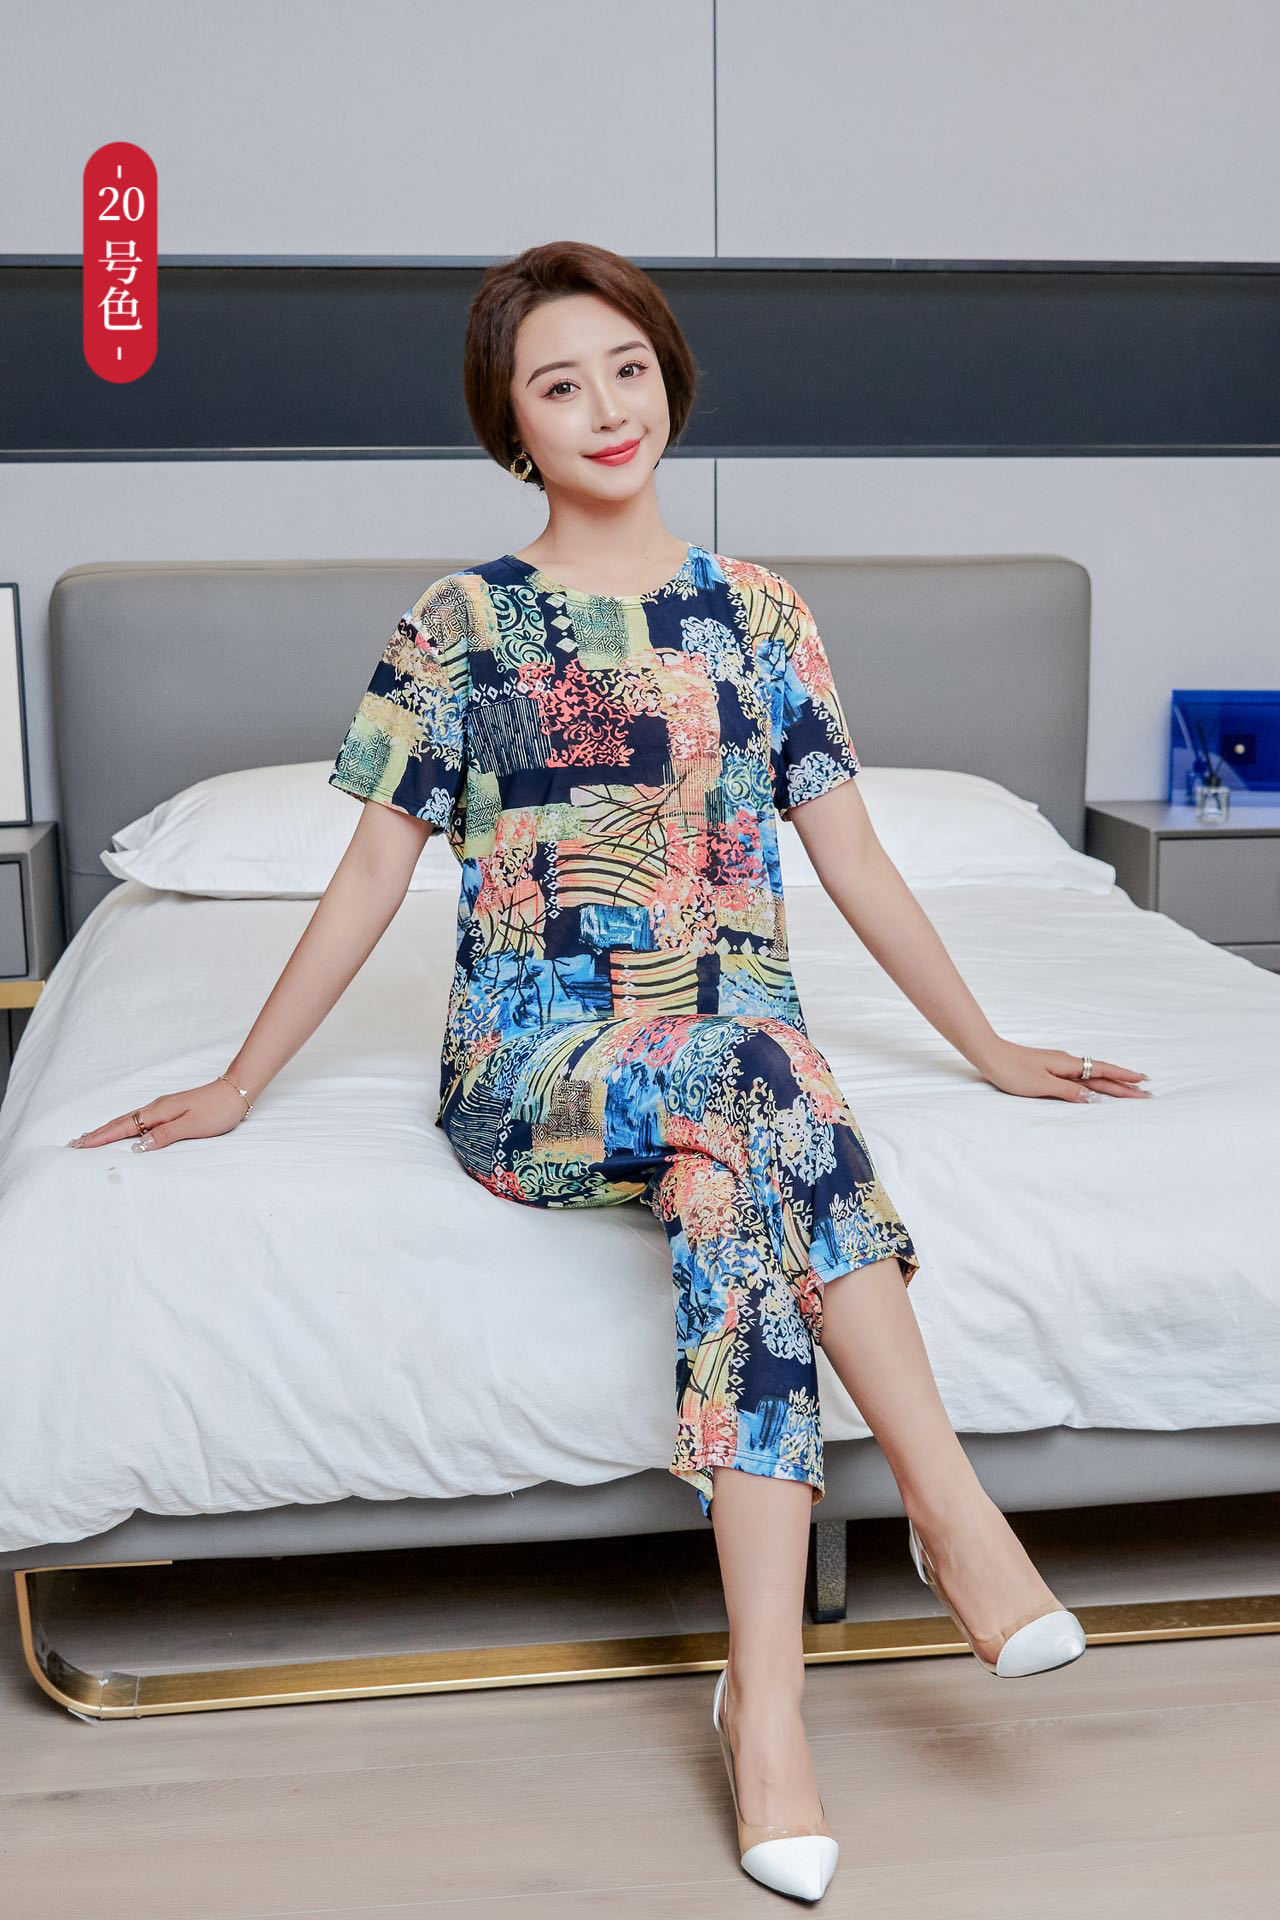 Summer New Ice Silk Mom Suit Middle-Aged and Elderly Women's Clothing Mother's Clothing Large Size plus-Sized Casual Women's Short Sleeve Wholesale